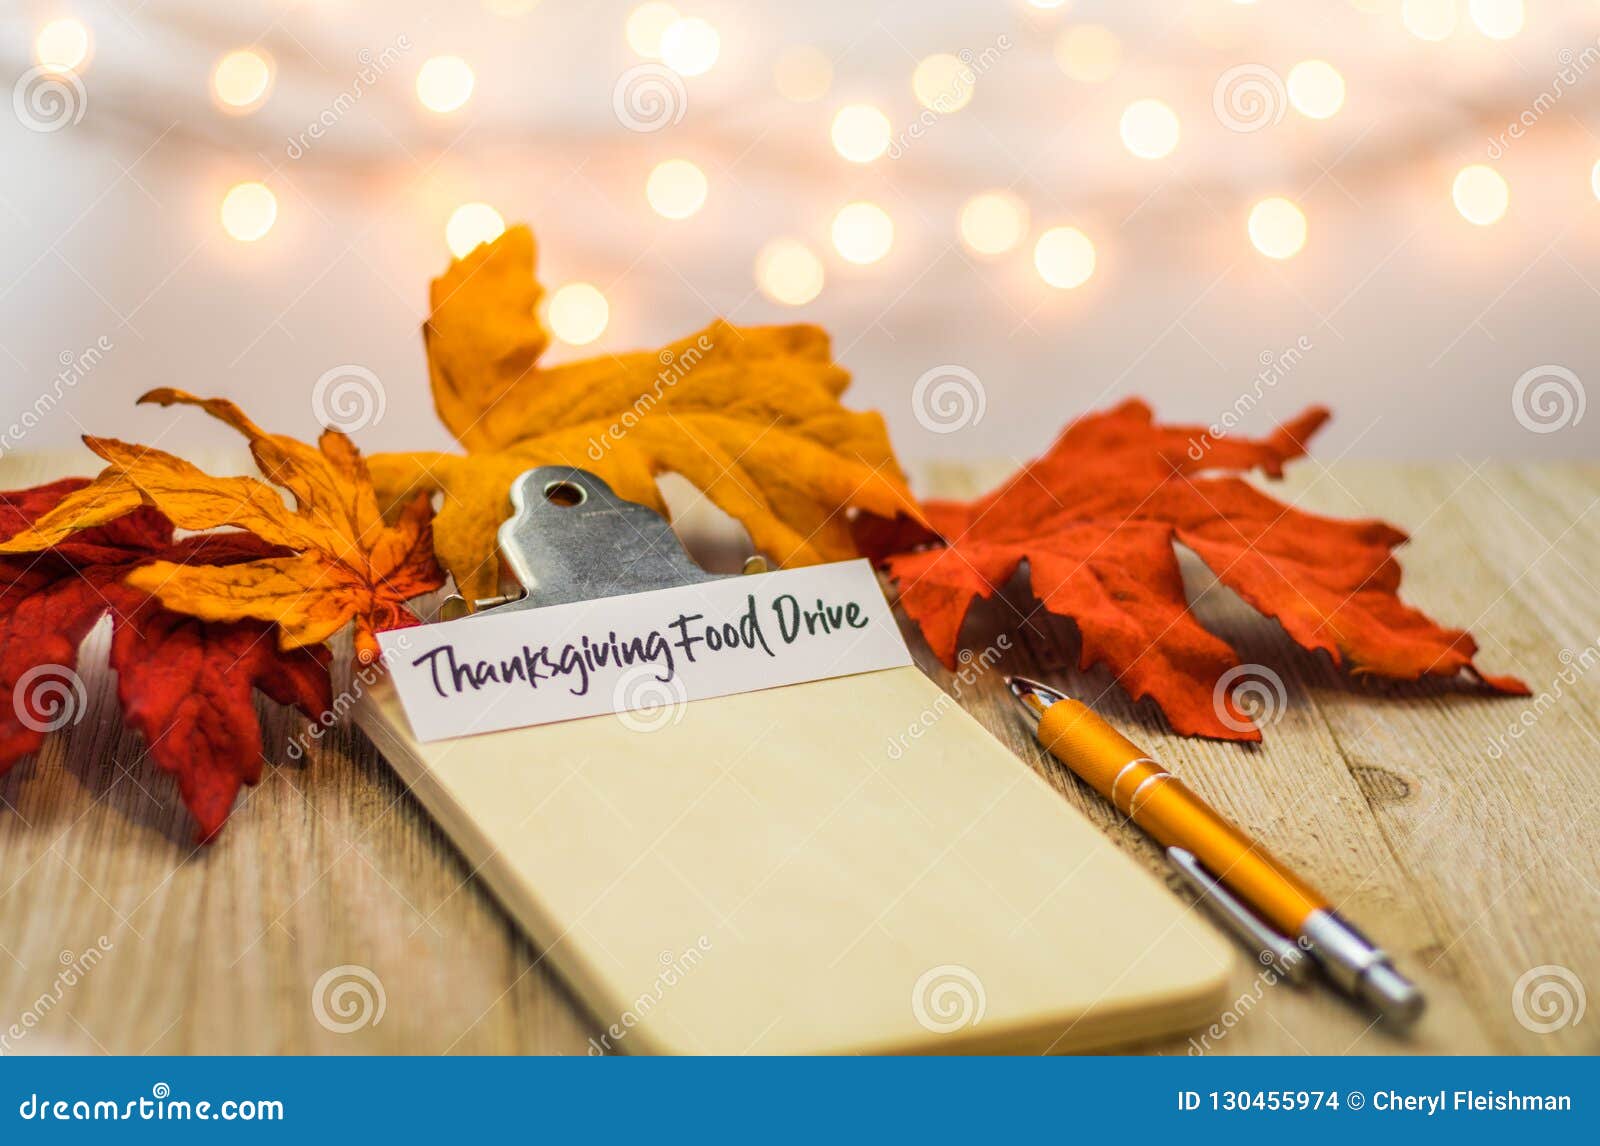 Thanksgiving Food Drive List Concept on Blank Clipboard Surrounded with ...